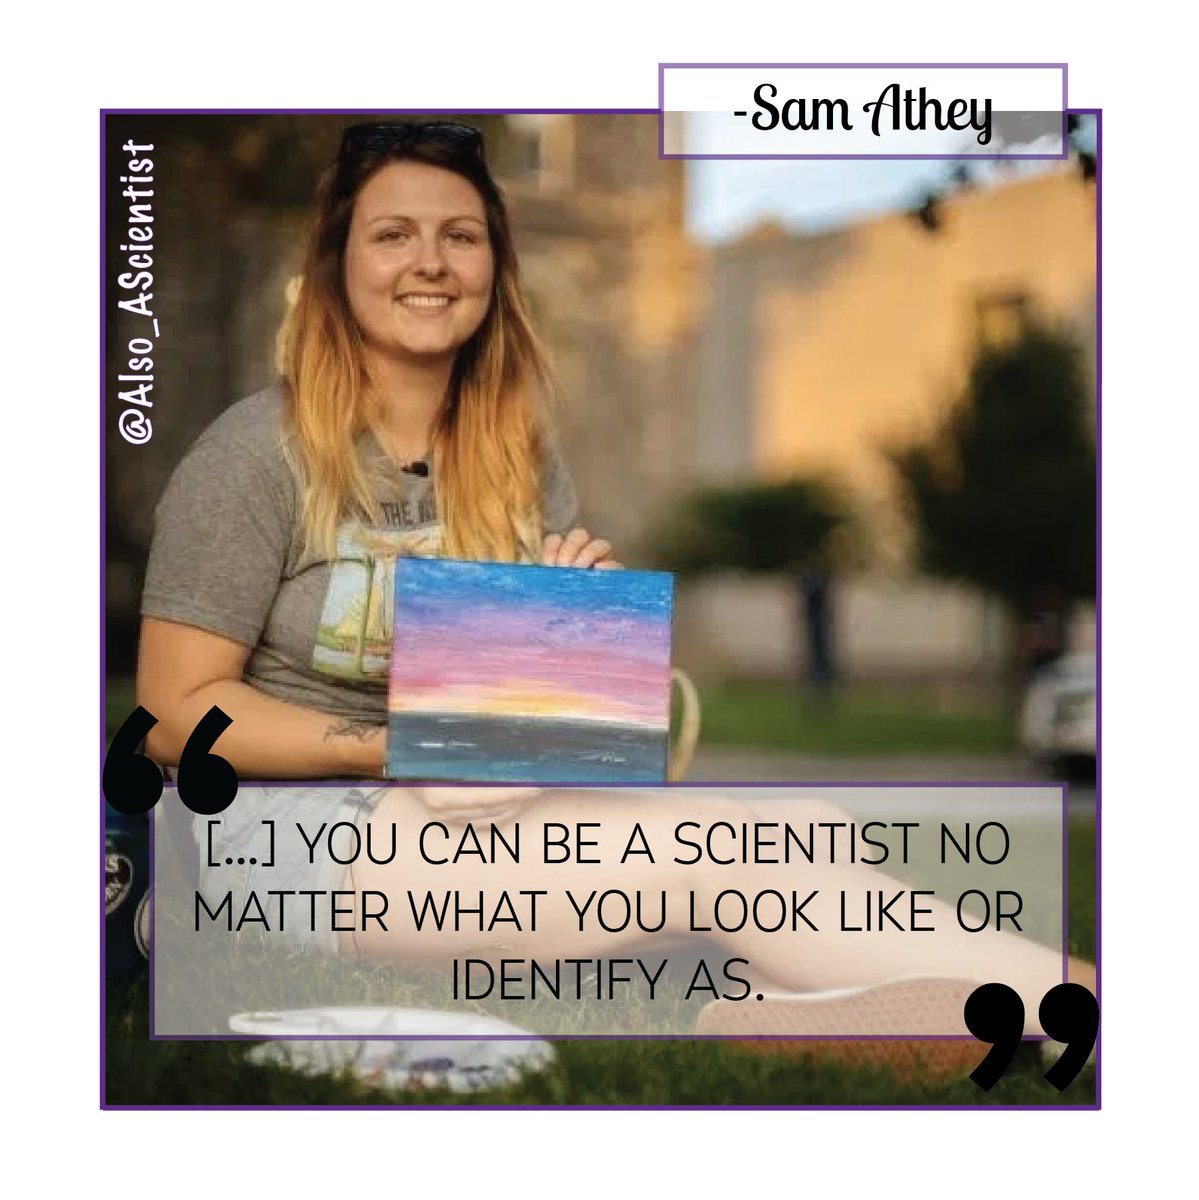 Meet @sustainablesam_, who moved from the US🇺🇸 to @UofTEarthSci in Canada 🇨🇦 to study microplastics & their chemical contaminants. Sam also loves hanging out in bookstores & reading historical fiction! #WomenInSTEM #QueerInSTEM #ADHD #BiInSci ✨ow.ly/kOyO50ytlfW✨